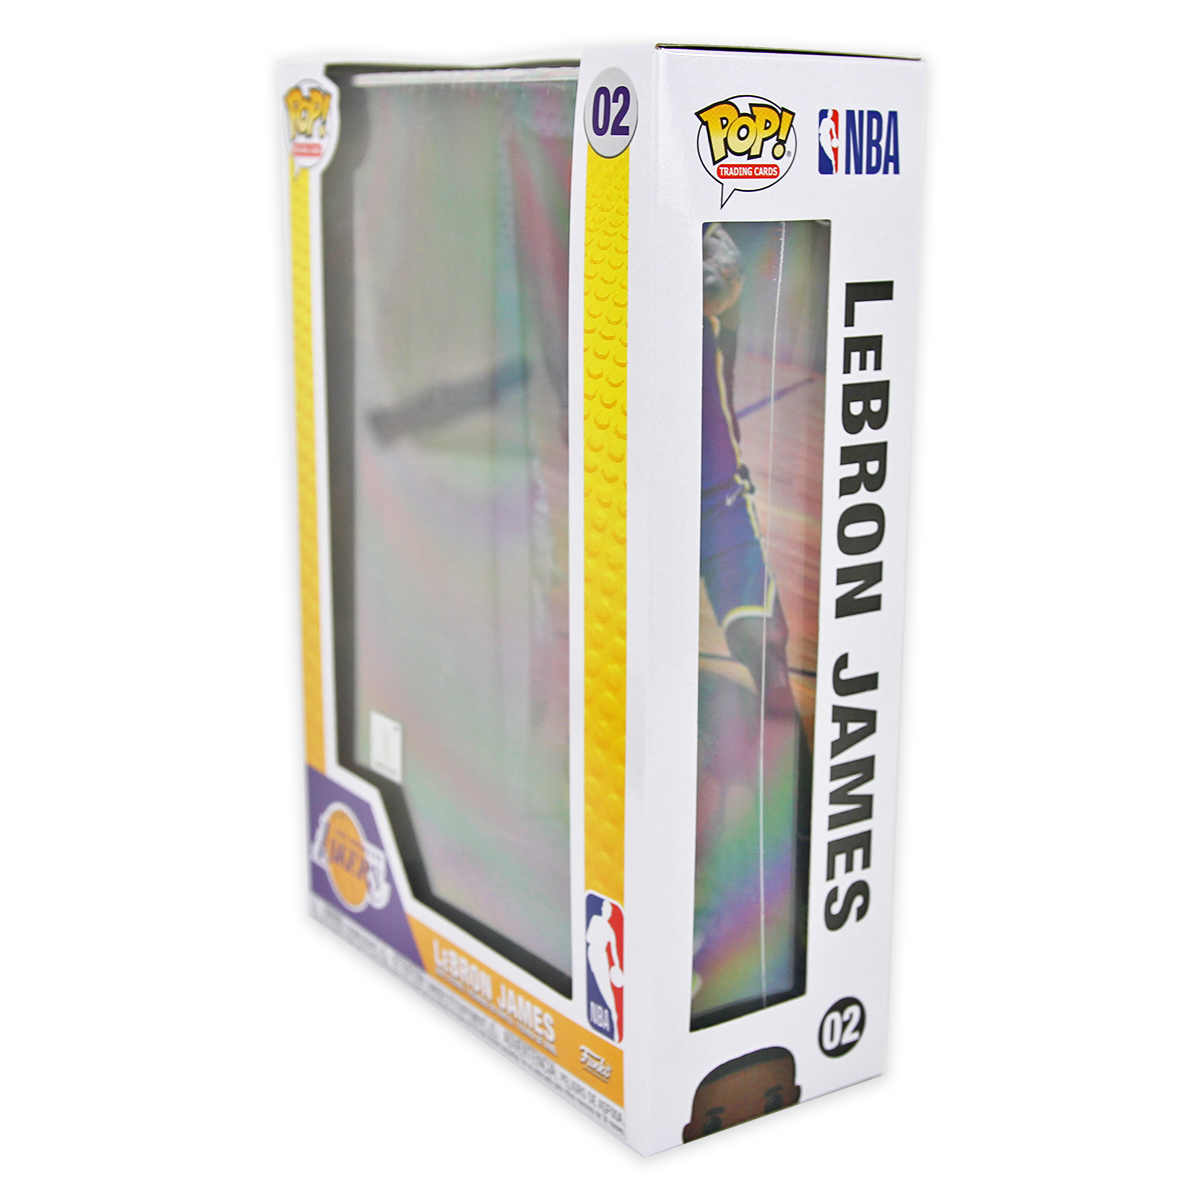 Buy Pop! Trading Cards LeBron James (Gold) - LA Lakers at Funko.